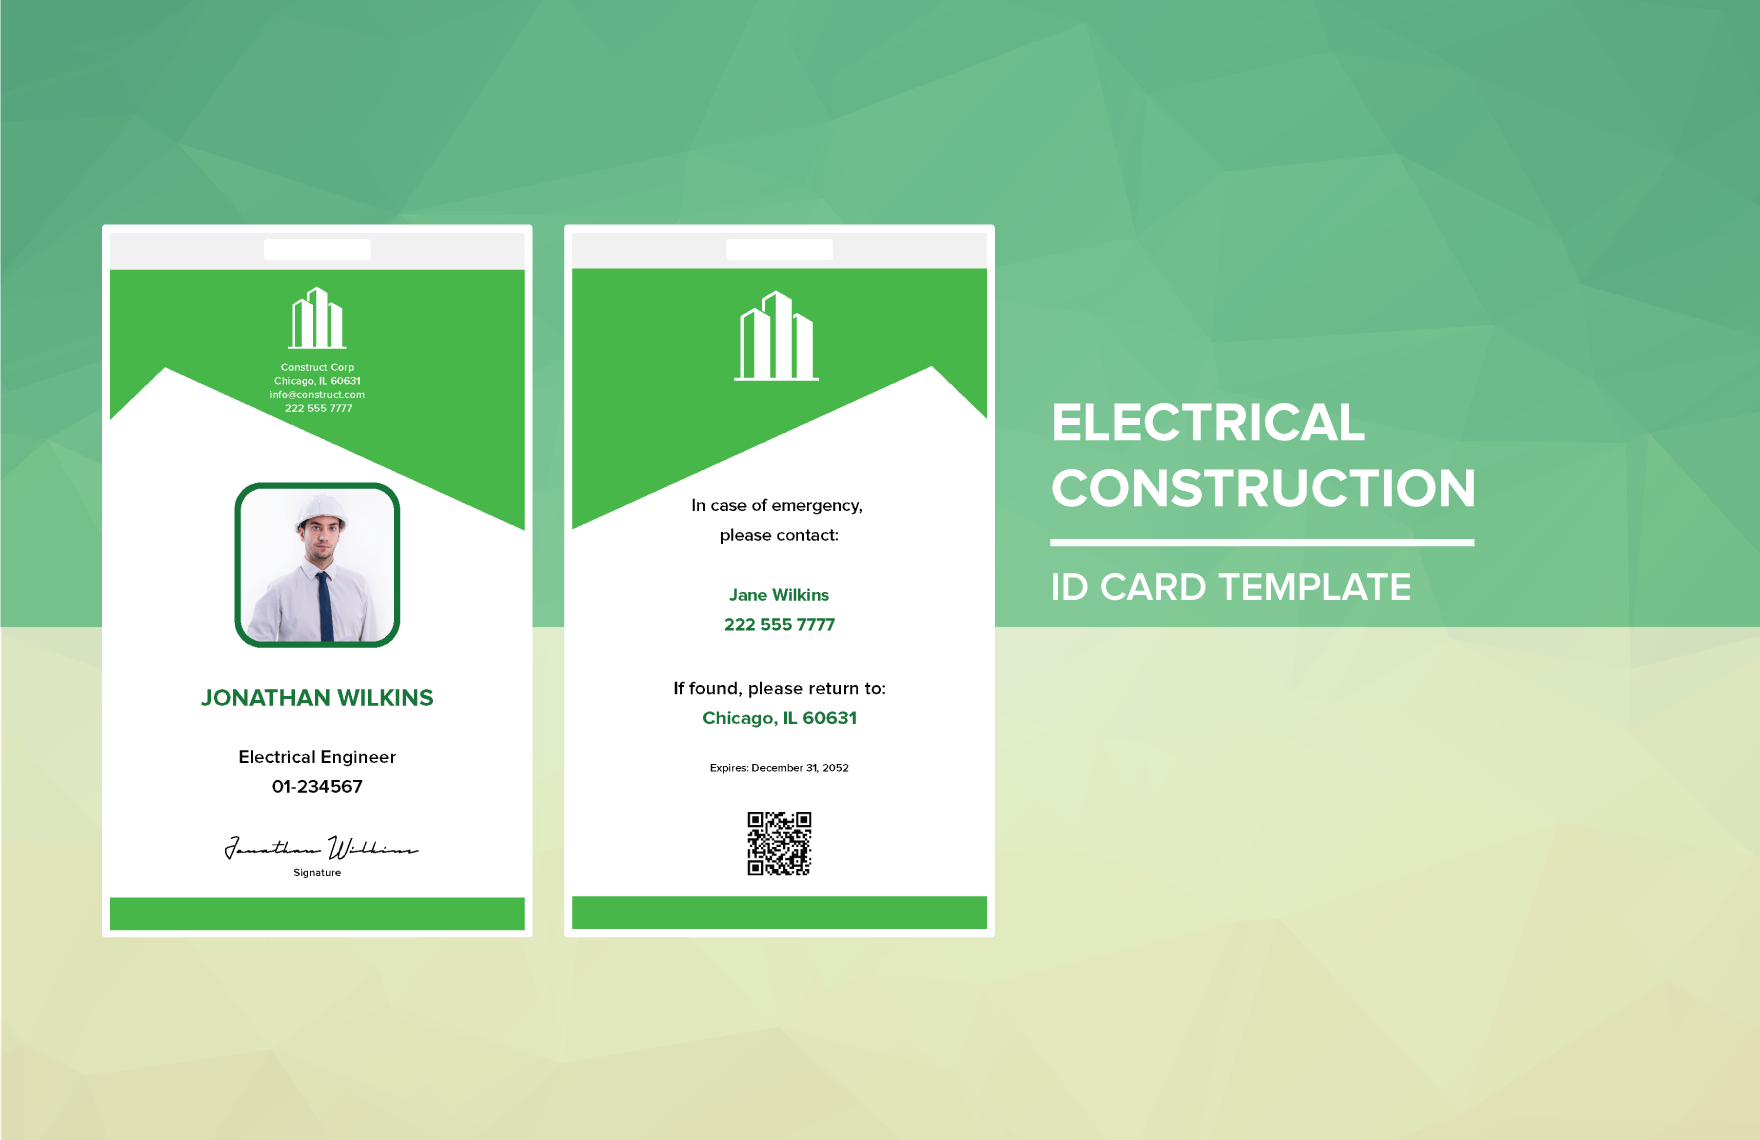 Electrical Construction ID Card